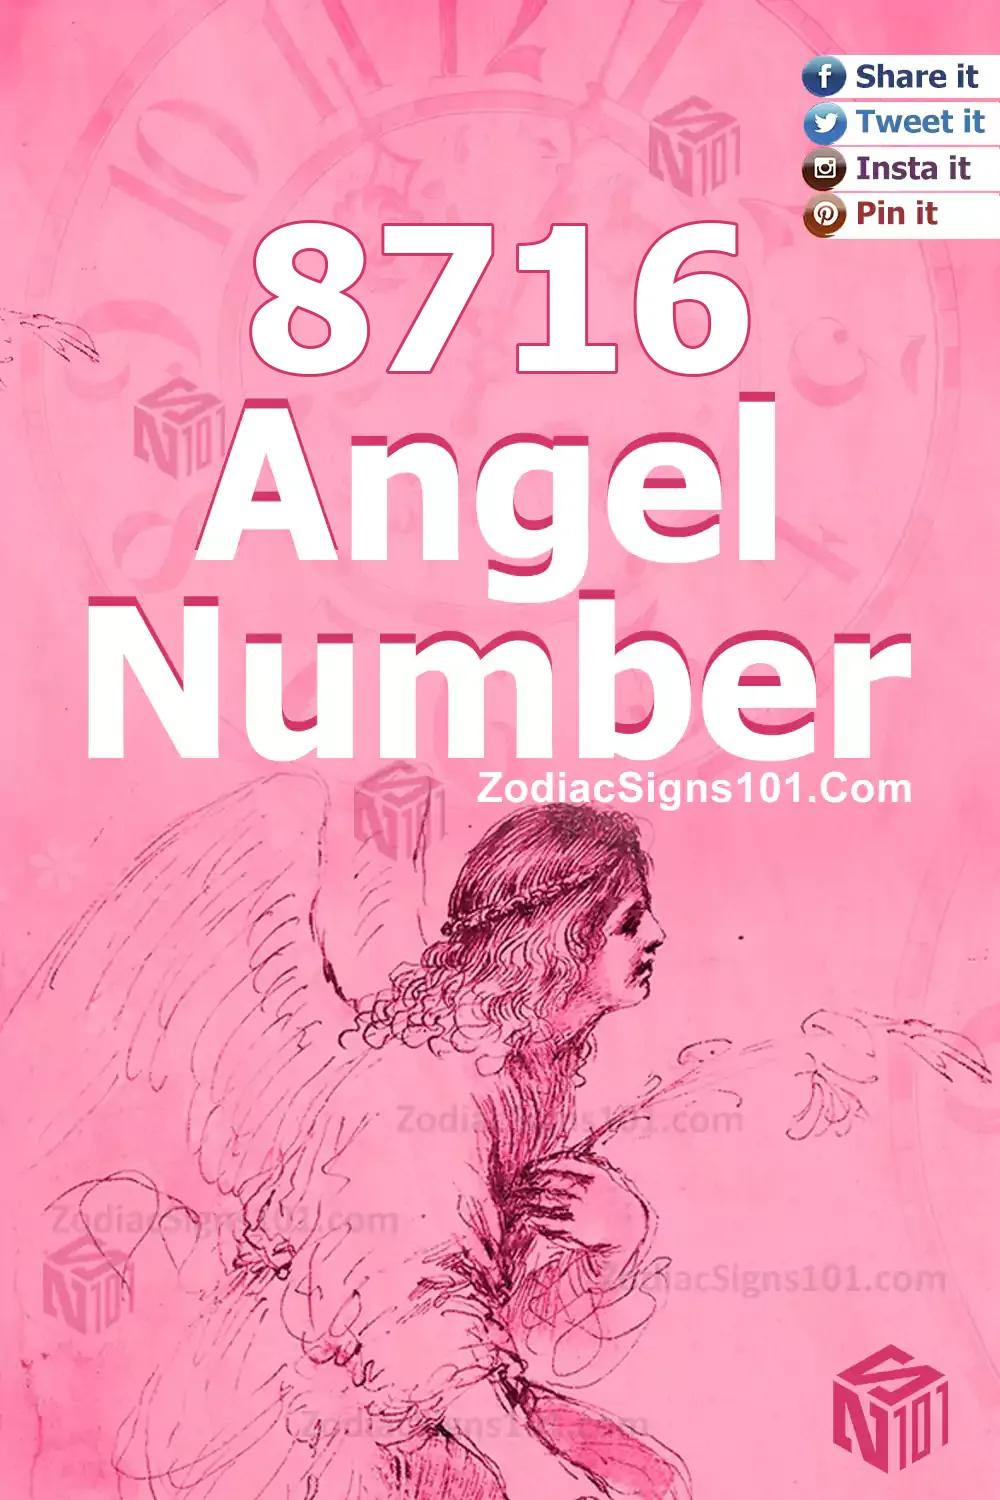 8716 Angel Number Meaning